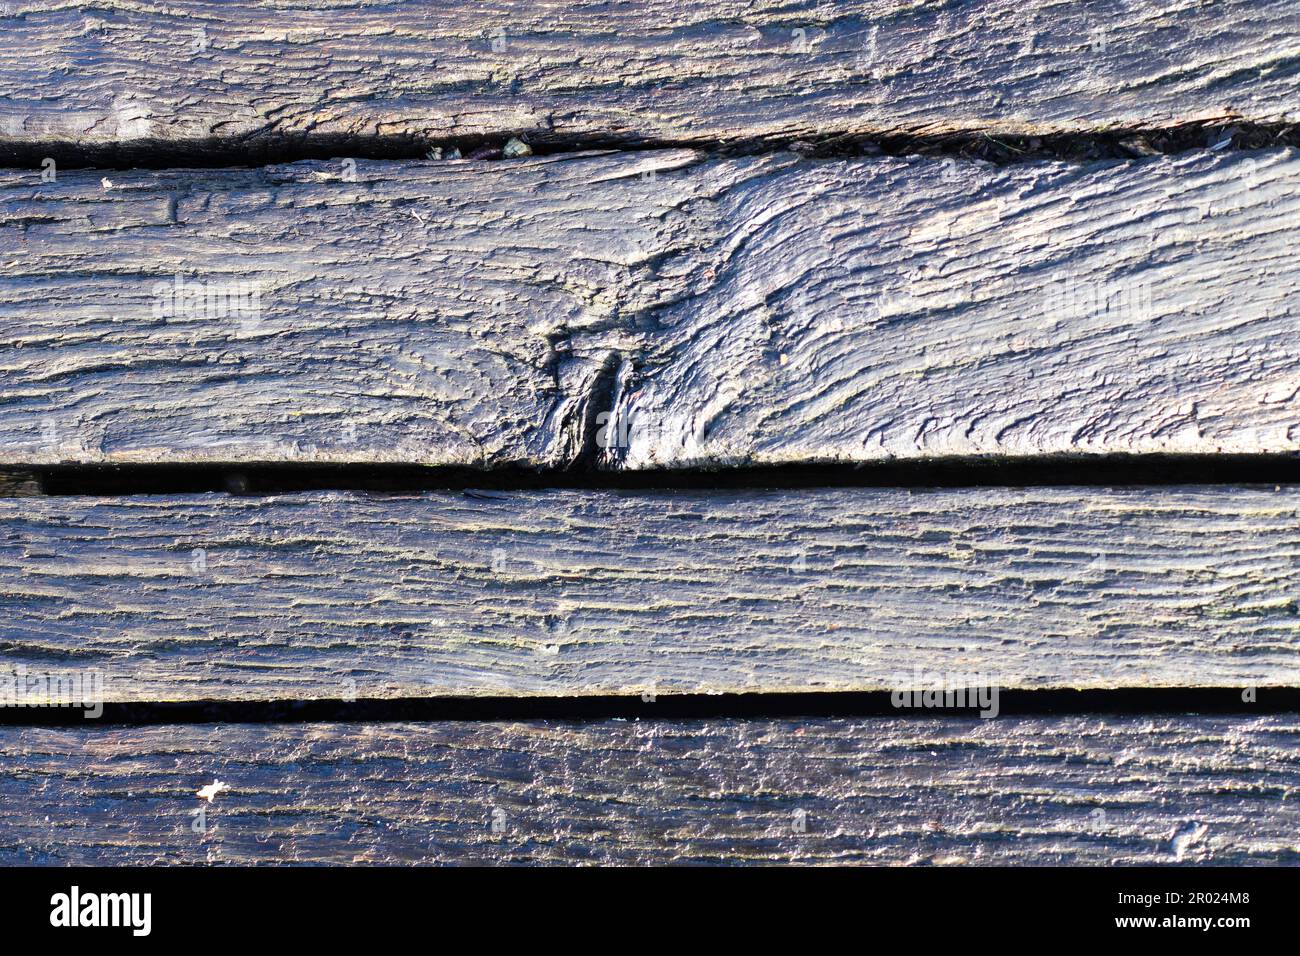 Detailed close up view on different wood surfaces showing planks logs and wooden walls in high resolution Stock Photo